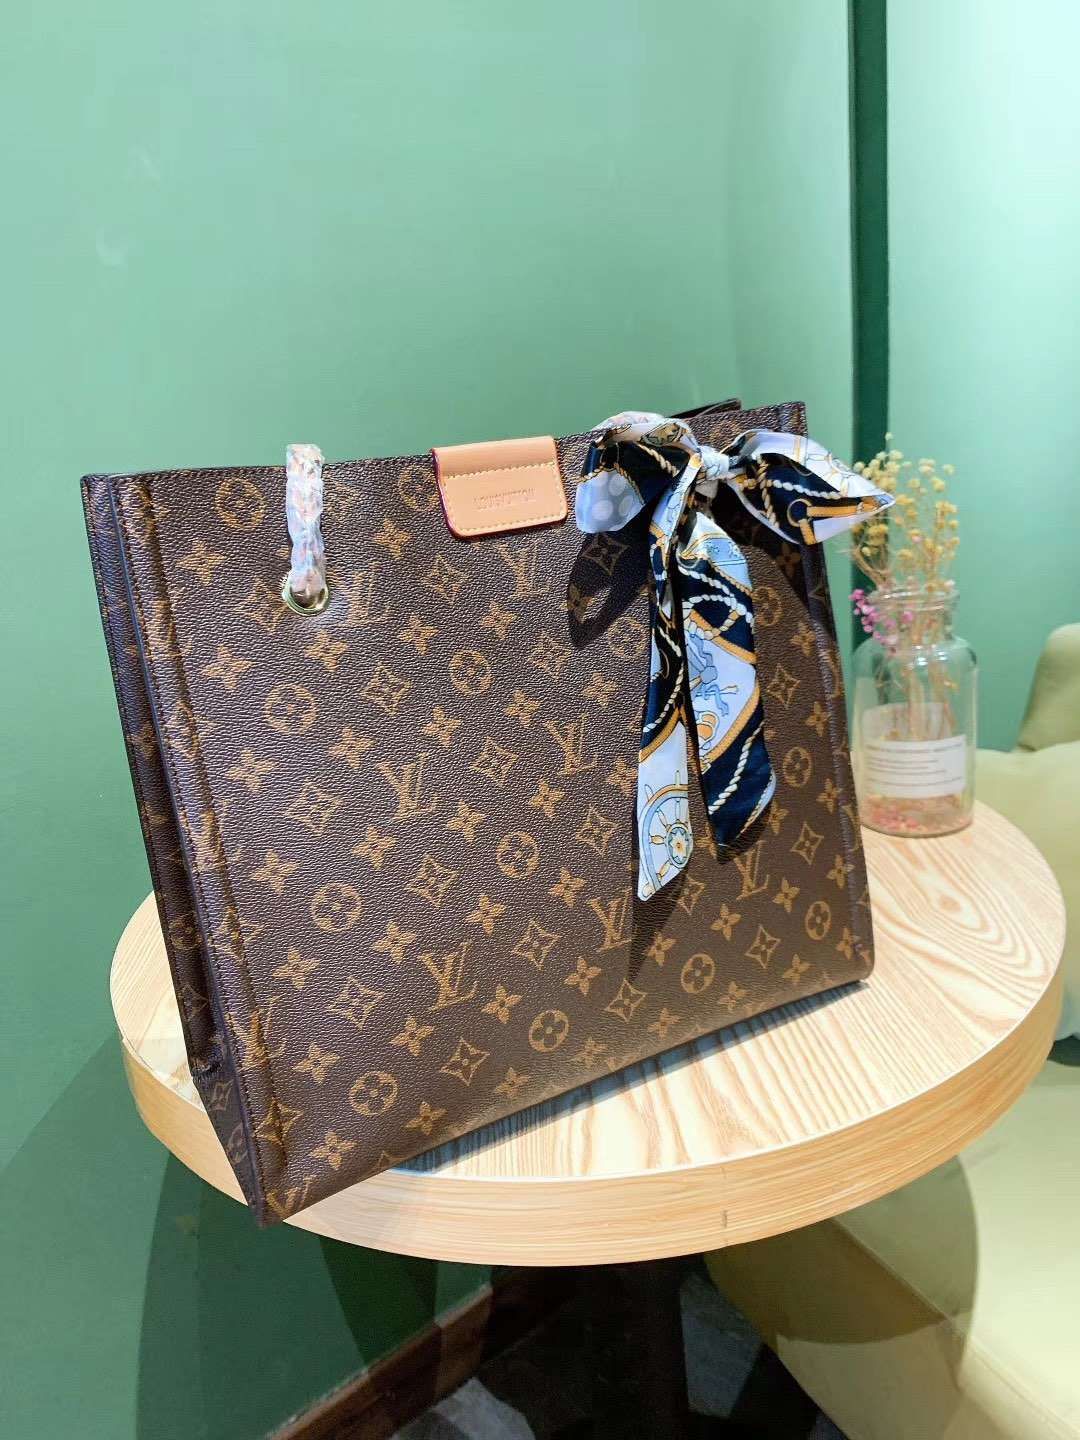 2019 Restore Original Price Tomorrow Luxury Louis Vuitton Hight Quality Backpack Leather Clutch ...